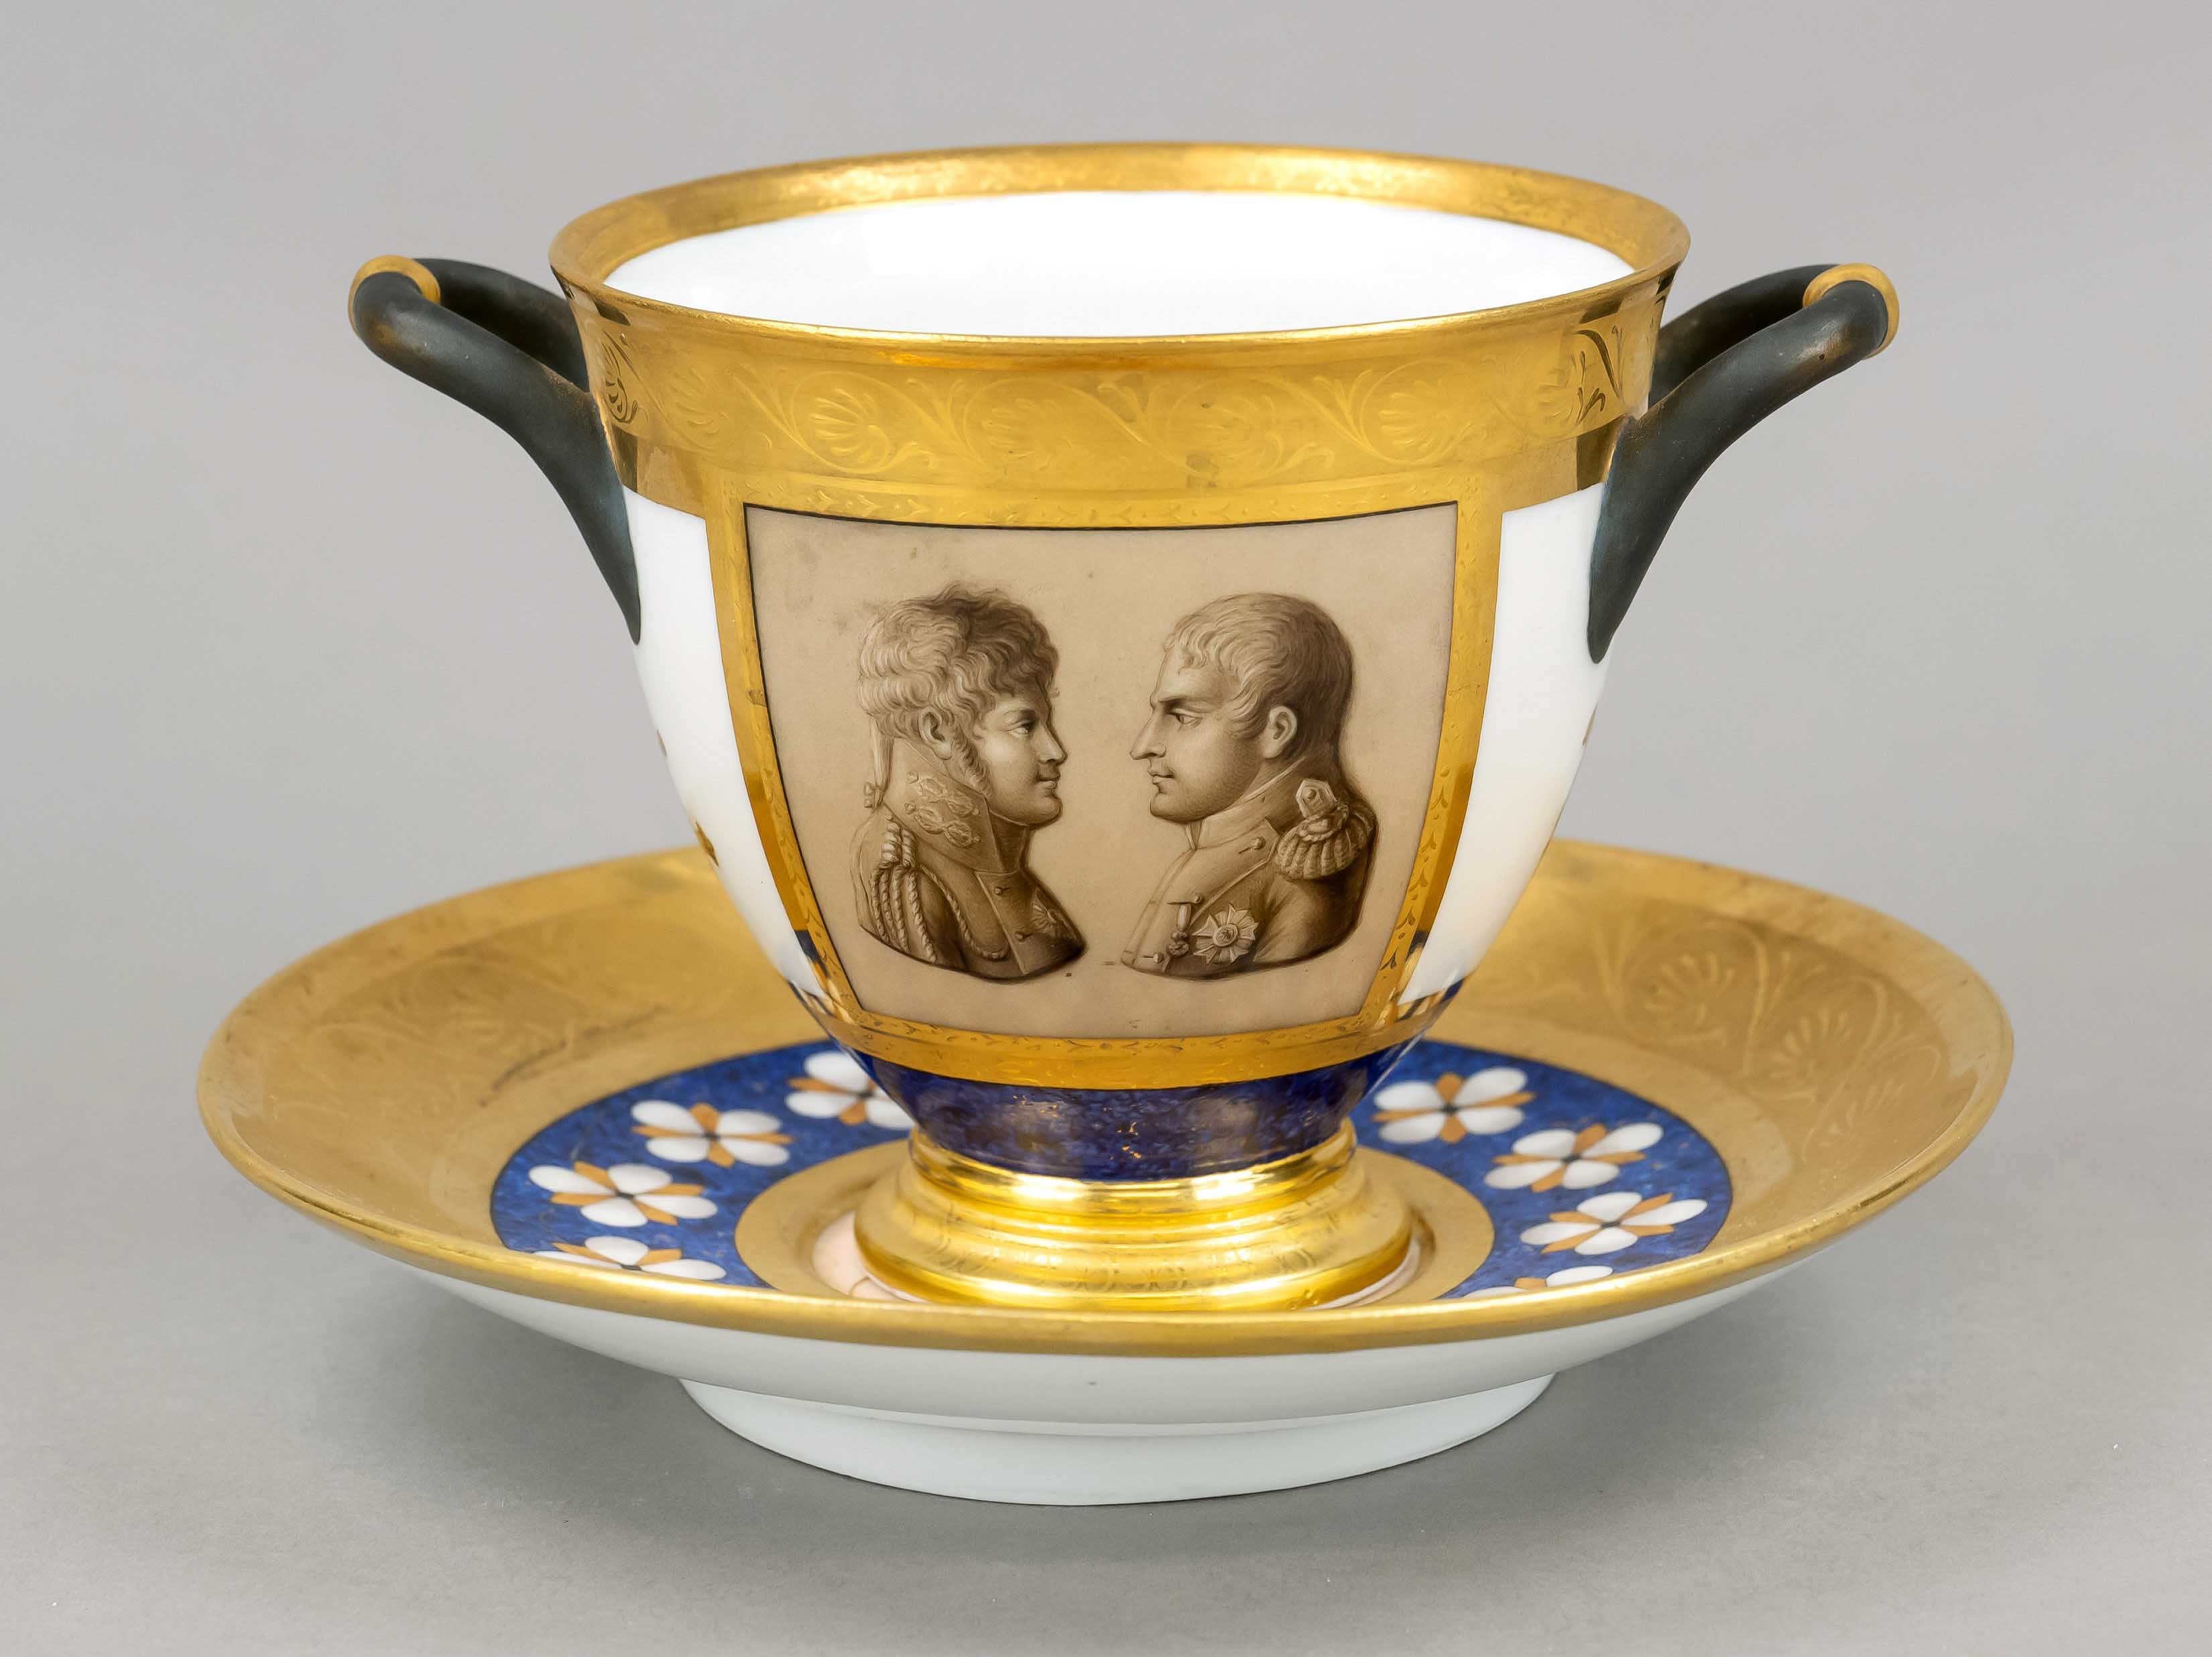 Large ruler's cup, KPM Berlin, around 1800, 1, W., Painter's mark from 1803, large cup with side